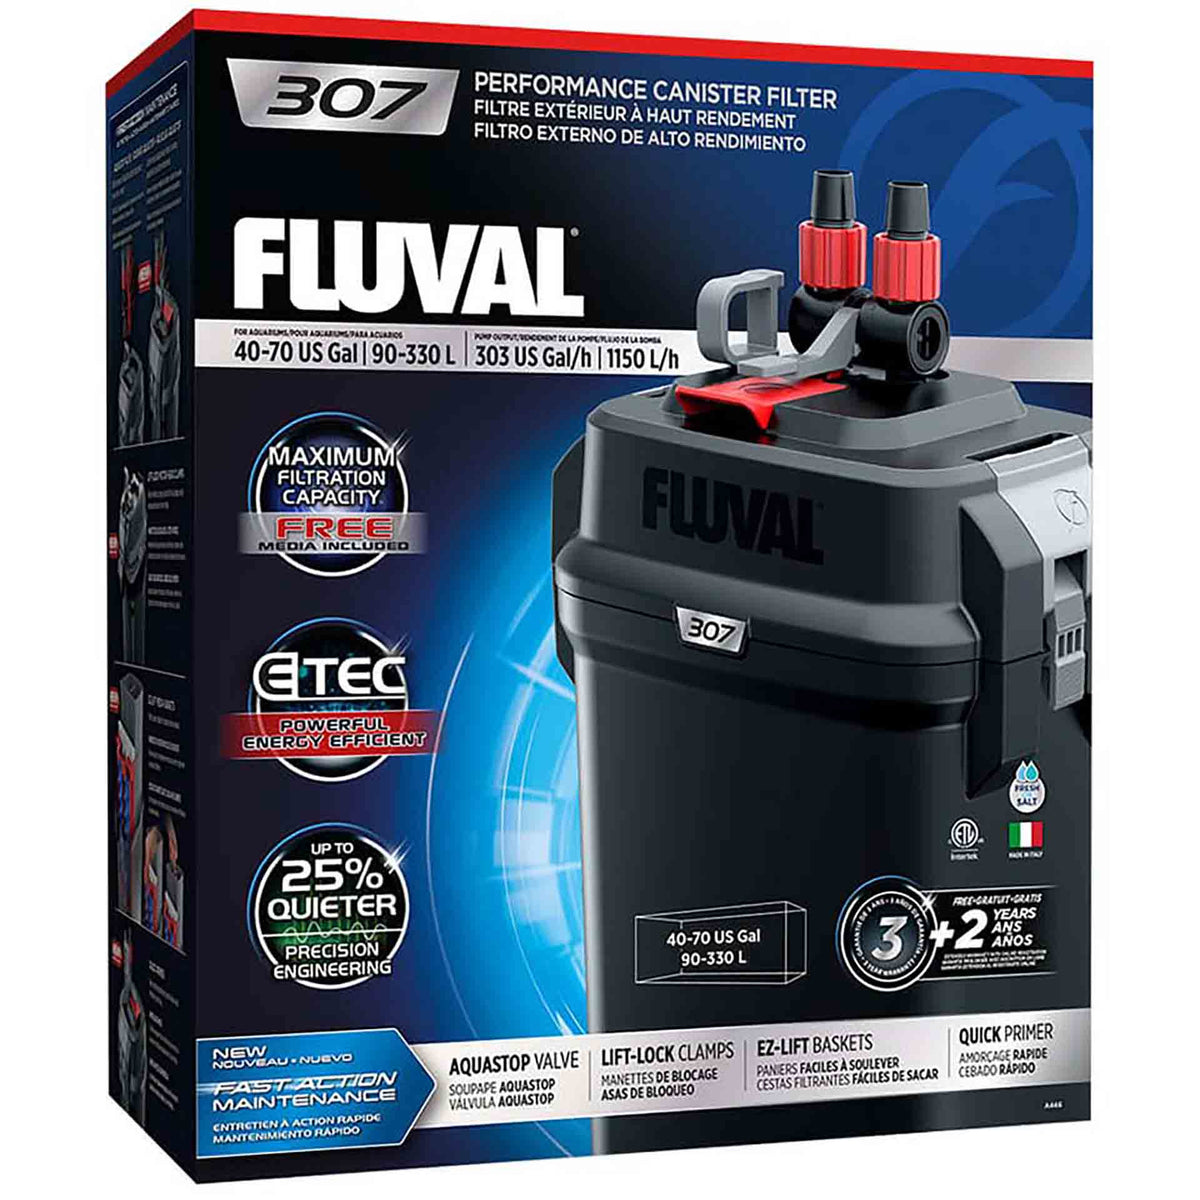 Fluval 307 Performance Canister Filter, up to 330 L Aquarium